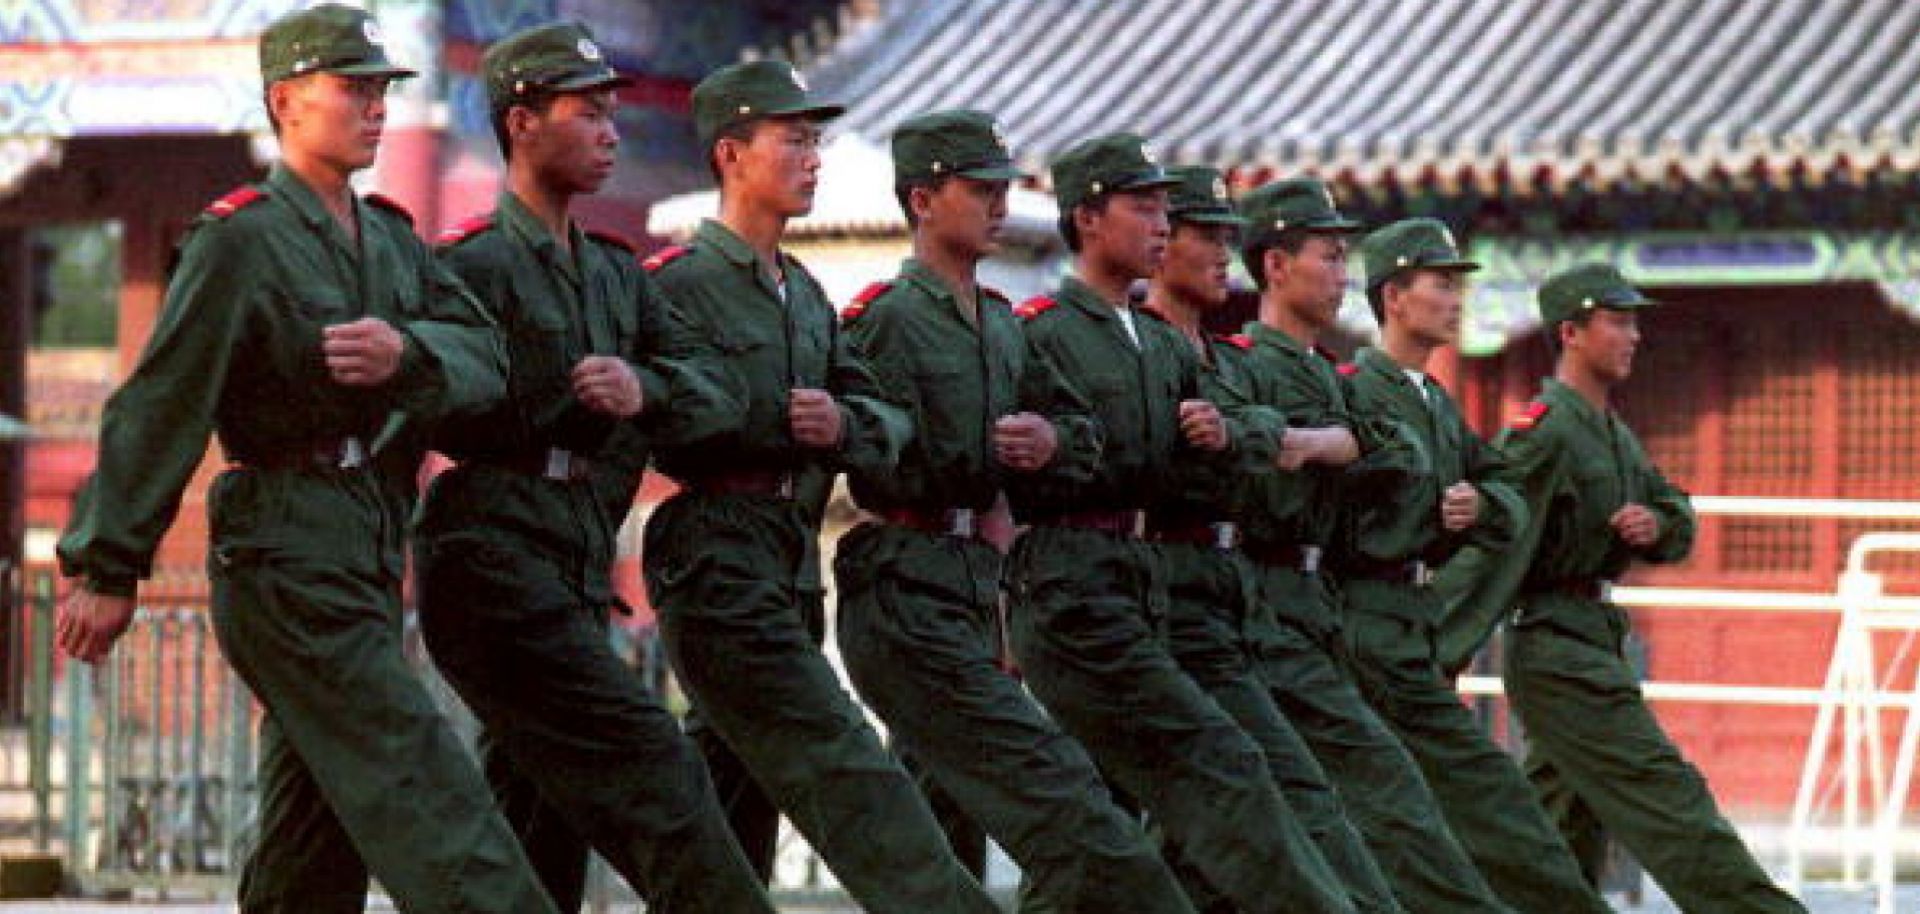 People's Liberation Army troops march near their Tiananmen Square barracks in 1993, four years after the suppression of protesters.